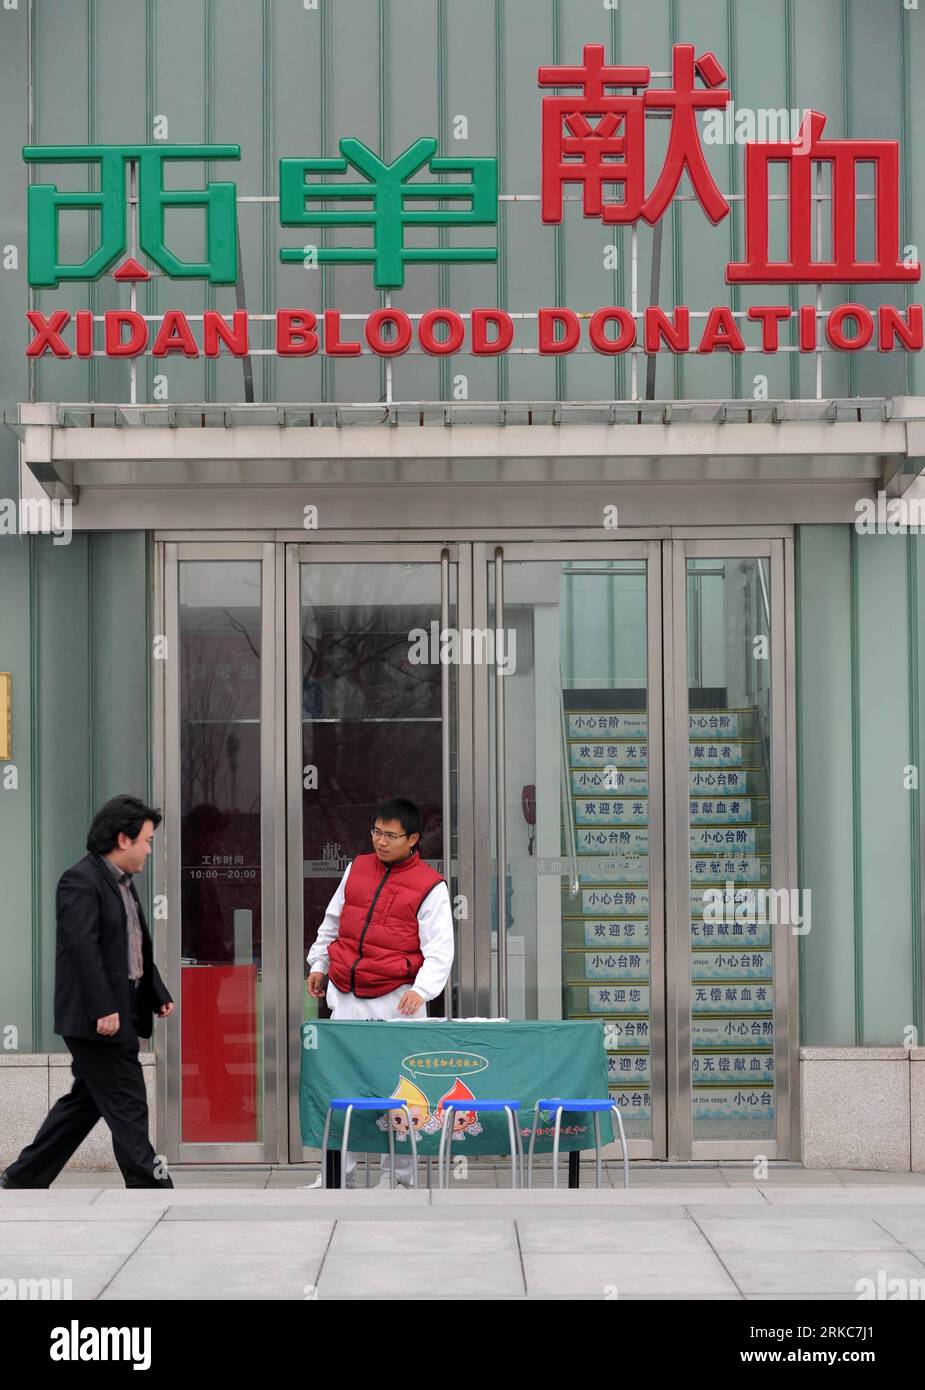 Bildnummer: 54688311  Datum: 30.11.2010  Copyright: imago/Xinhua (101130) -- BEIJING, Nov. 30, 2010 (Xinhua) -- A man walks by a blood donation spot in Xidan area of Beijing, capital of China, Nov. 30, 2010. Citizens answer the country s call for blood donation to back up reducing blood reserve in hospitals recently. (Xinhua/Jin Liangkuai) (cxy) CHINA-BEIJING-BLOOD DONATION (CN) PUBLICATIONxNOTxINxCHN Gesellschaft Blut spenden kbdig xsk 2010 hoch  o0 Blutspende, Blutspenden,    Bildnummer 54688311 Date 30 11 2010 Copyright Imago XINHUA  Beijing Nov 30 2010 XINHUA a Man Walks by a Blood Donatio Stock Photo